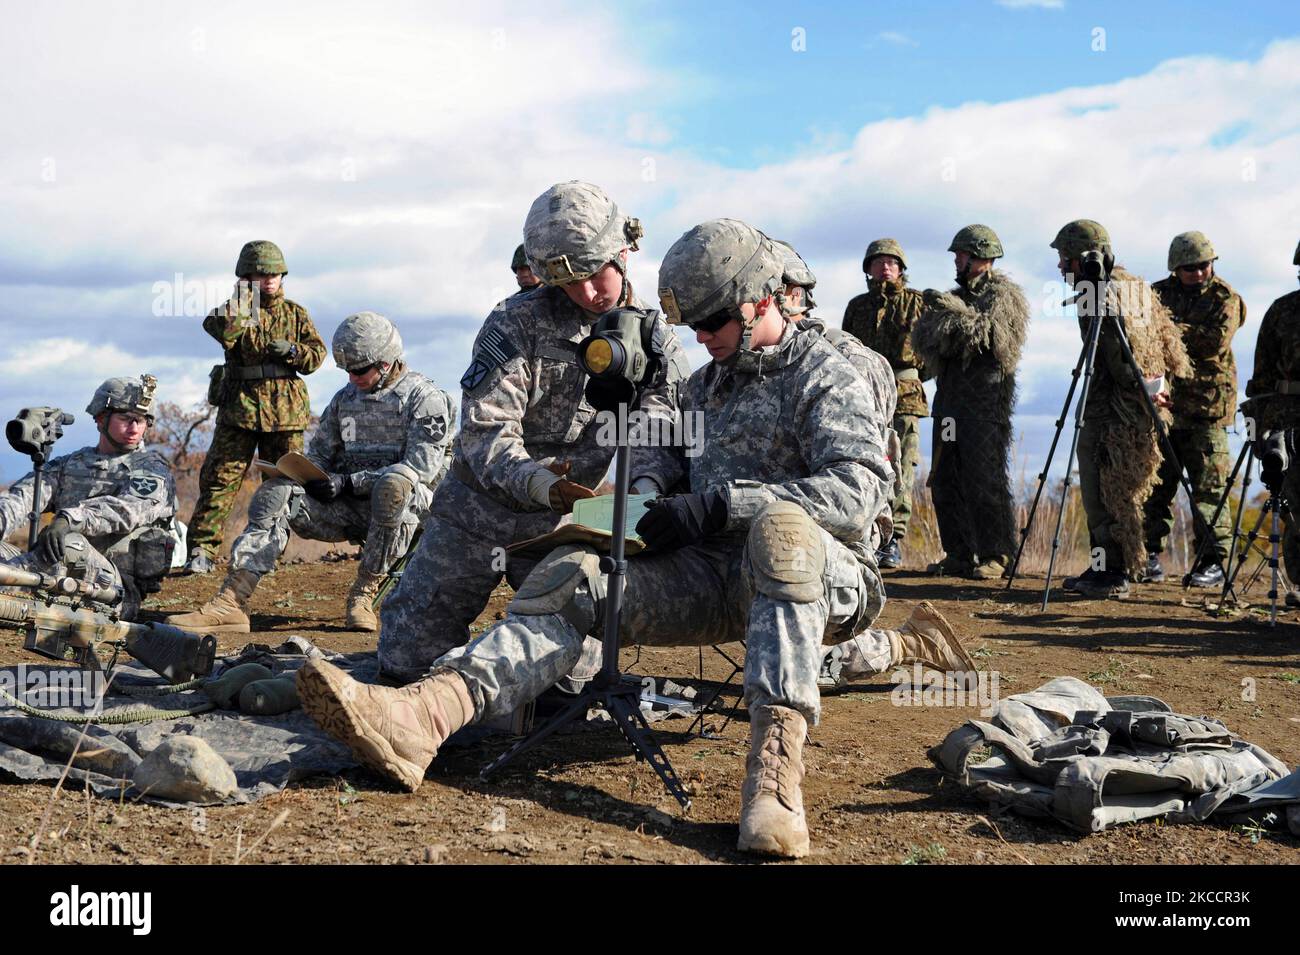 U.S. Army Soldiers review target locations for training. Stock Photo